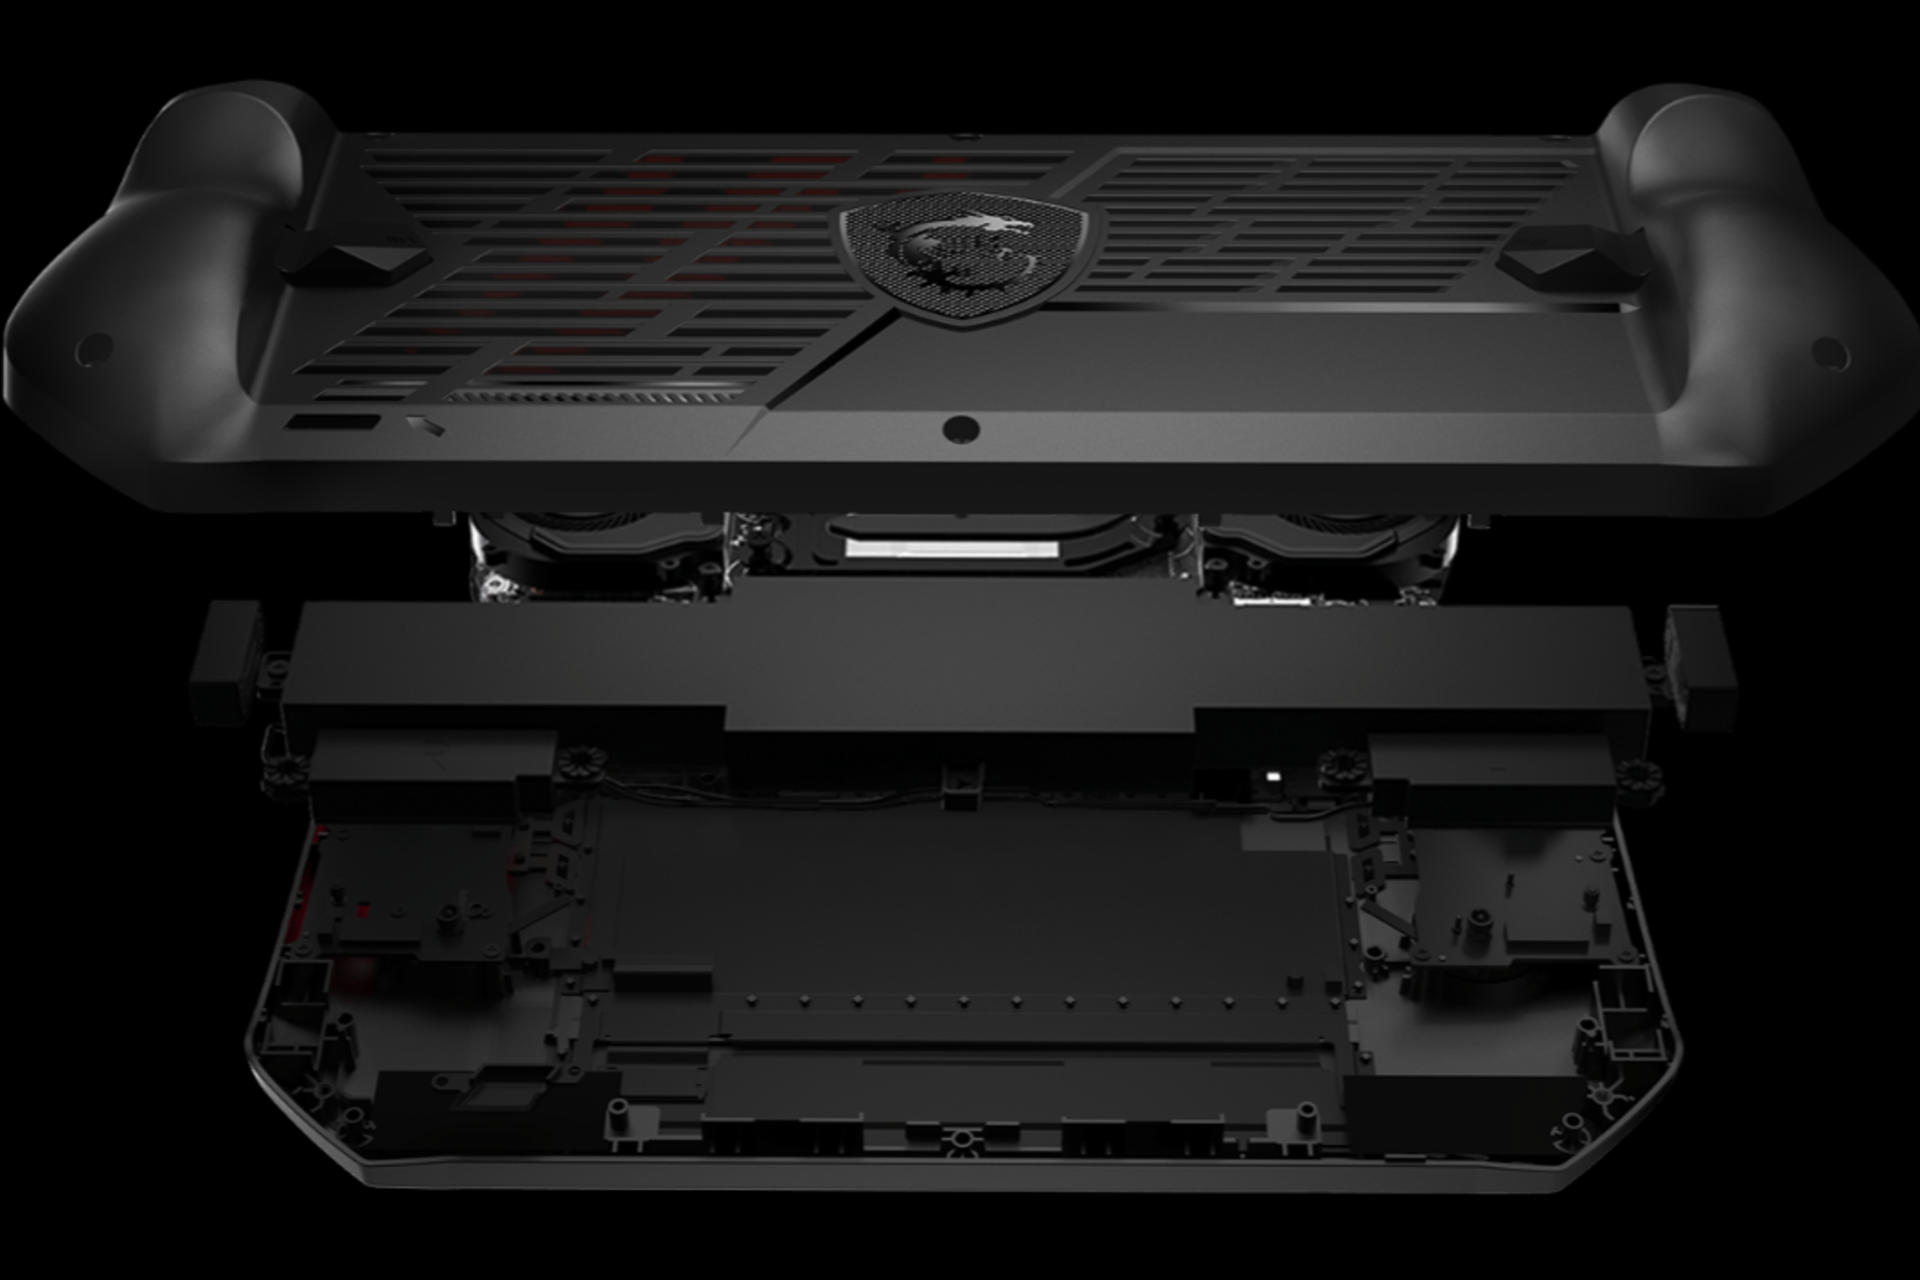 msi claw bumper, design, and performance review